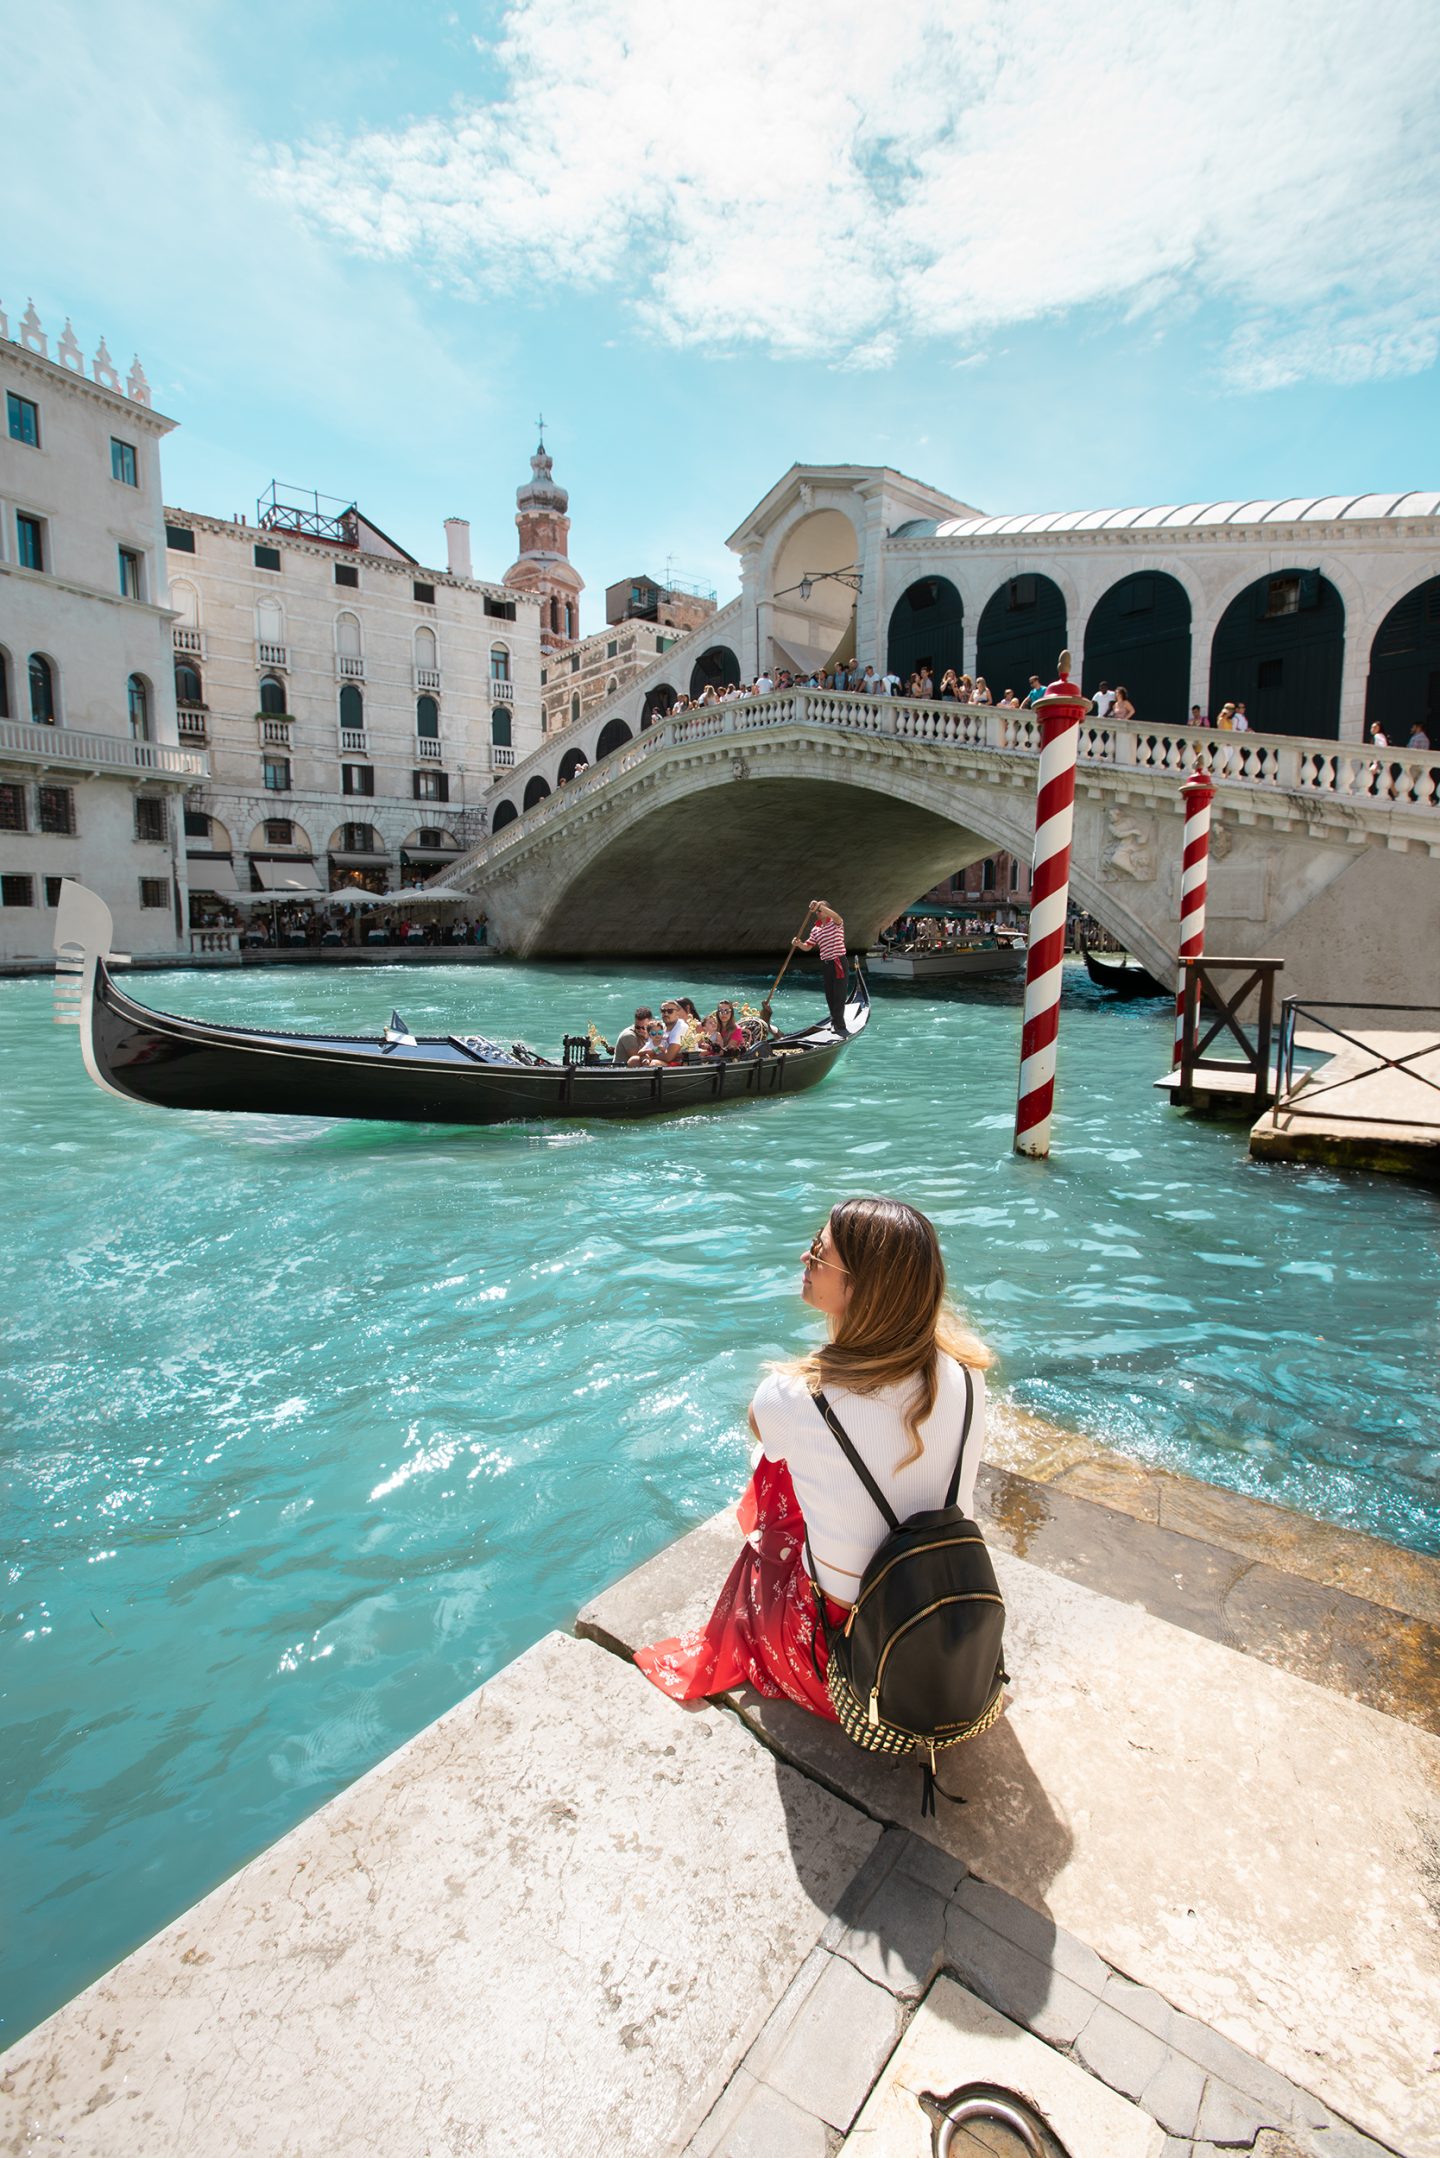 48 Hours in Venice: Where to Go & What to See